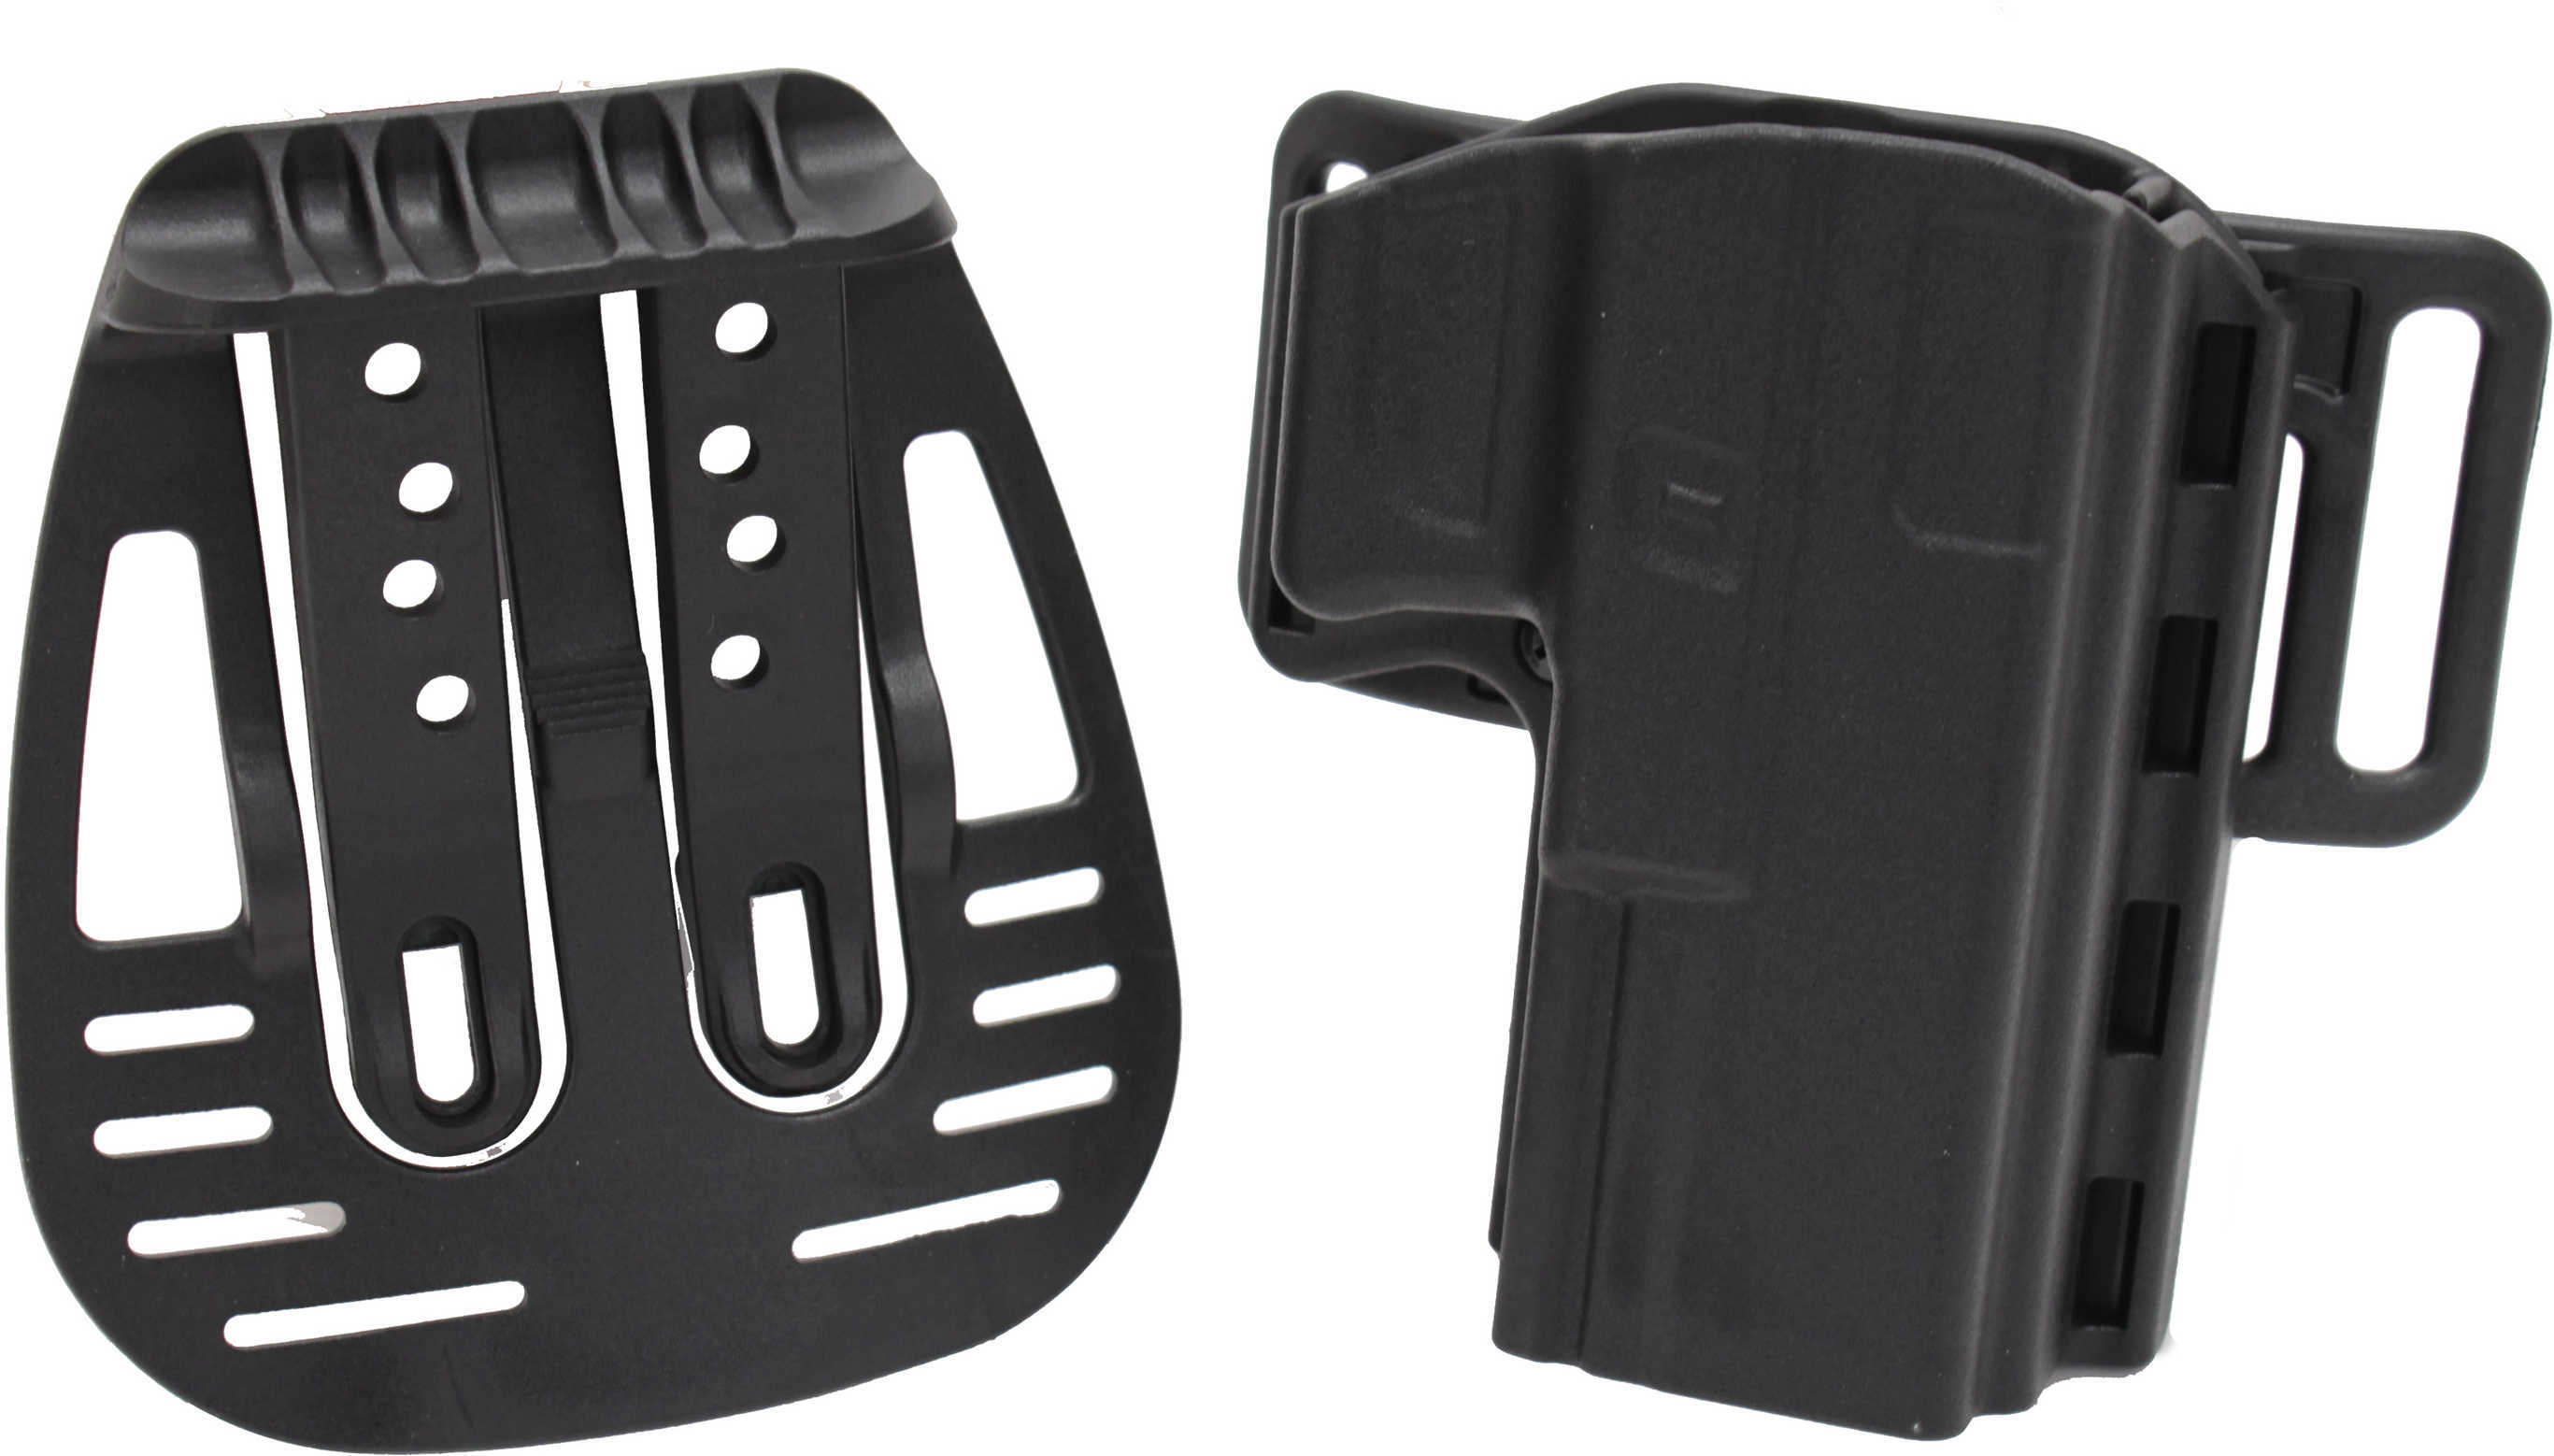 Uncle Mike's Reflex Holster Fits Glock 17 19 22 23 24 26 27 31 32 33 34 35 37 38 39 Right Hand Black 74211